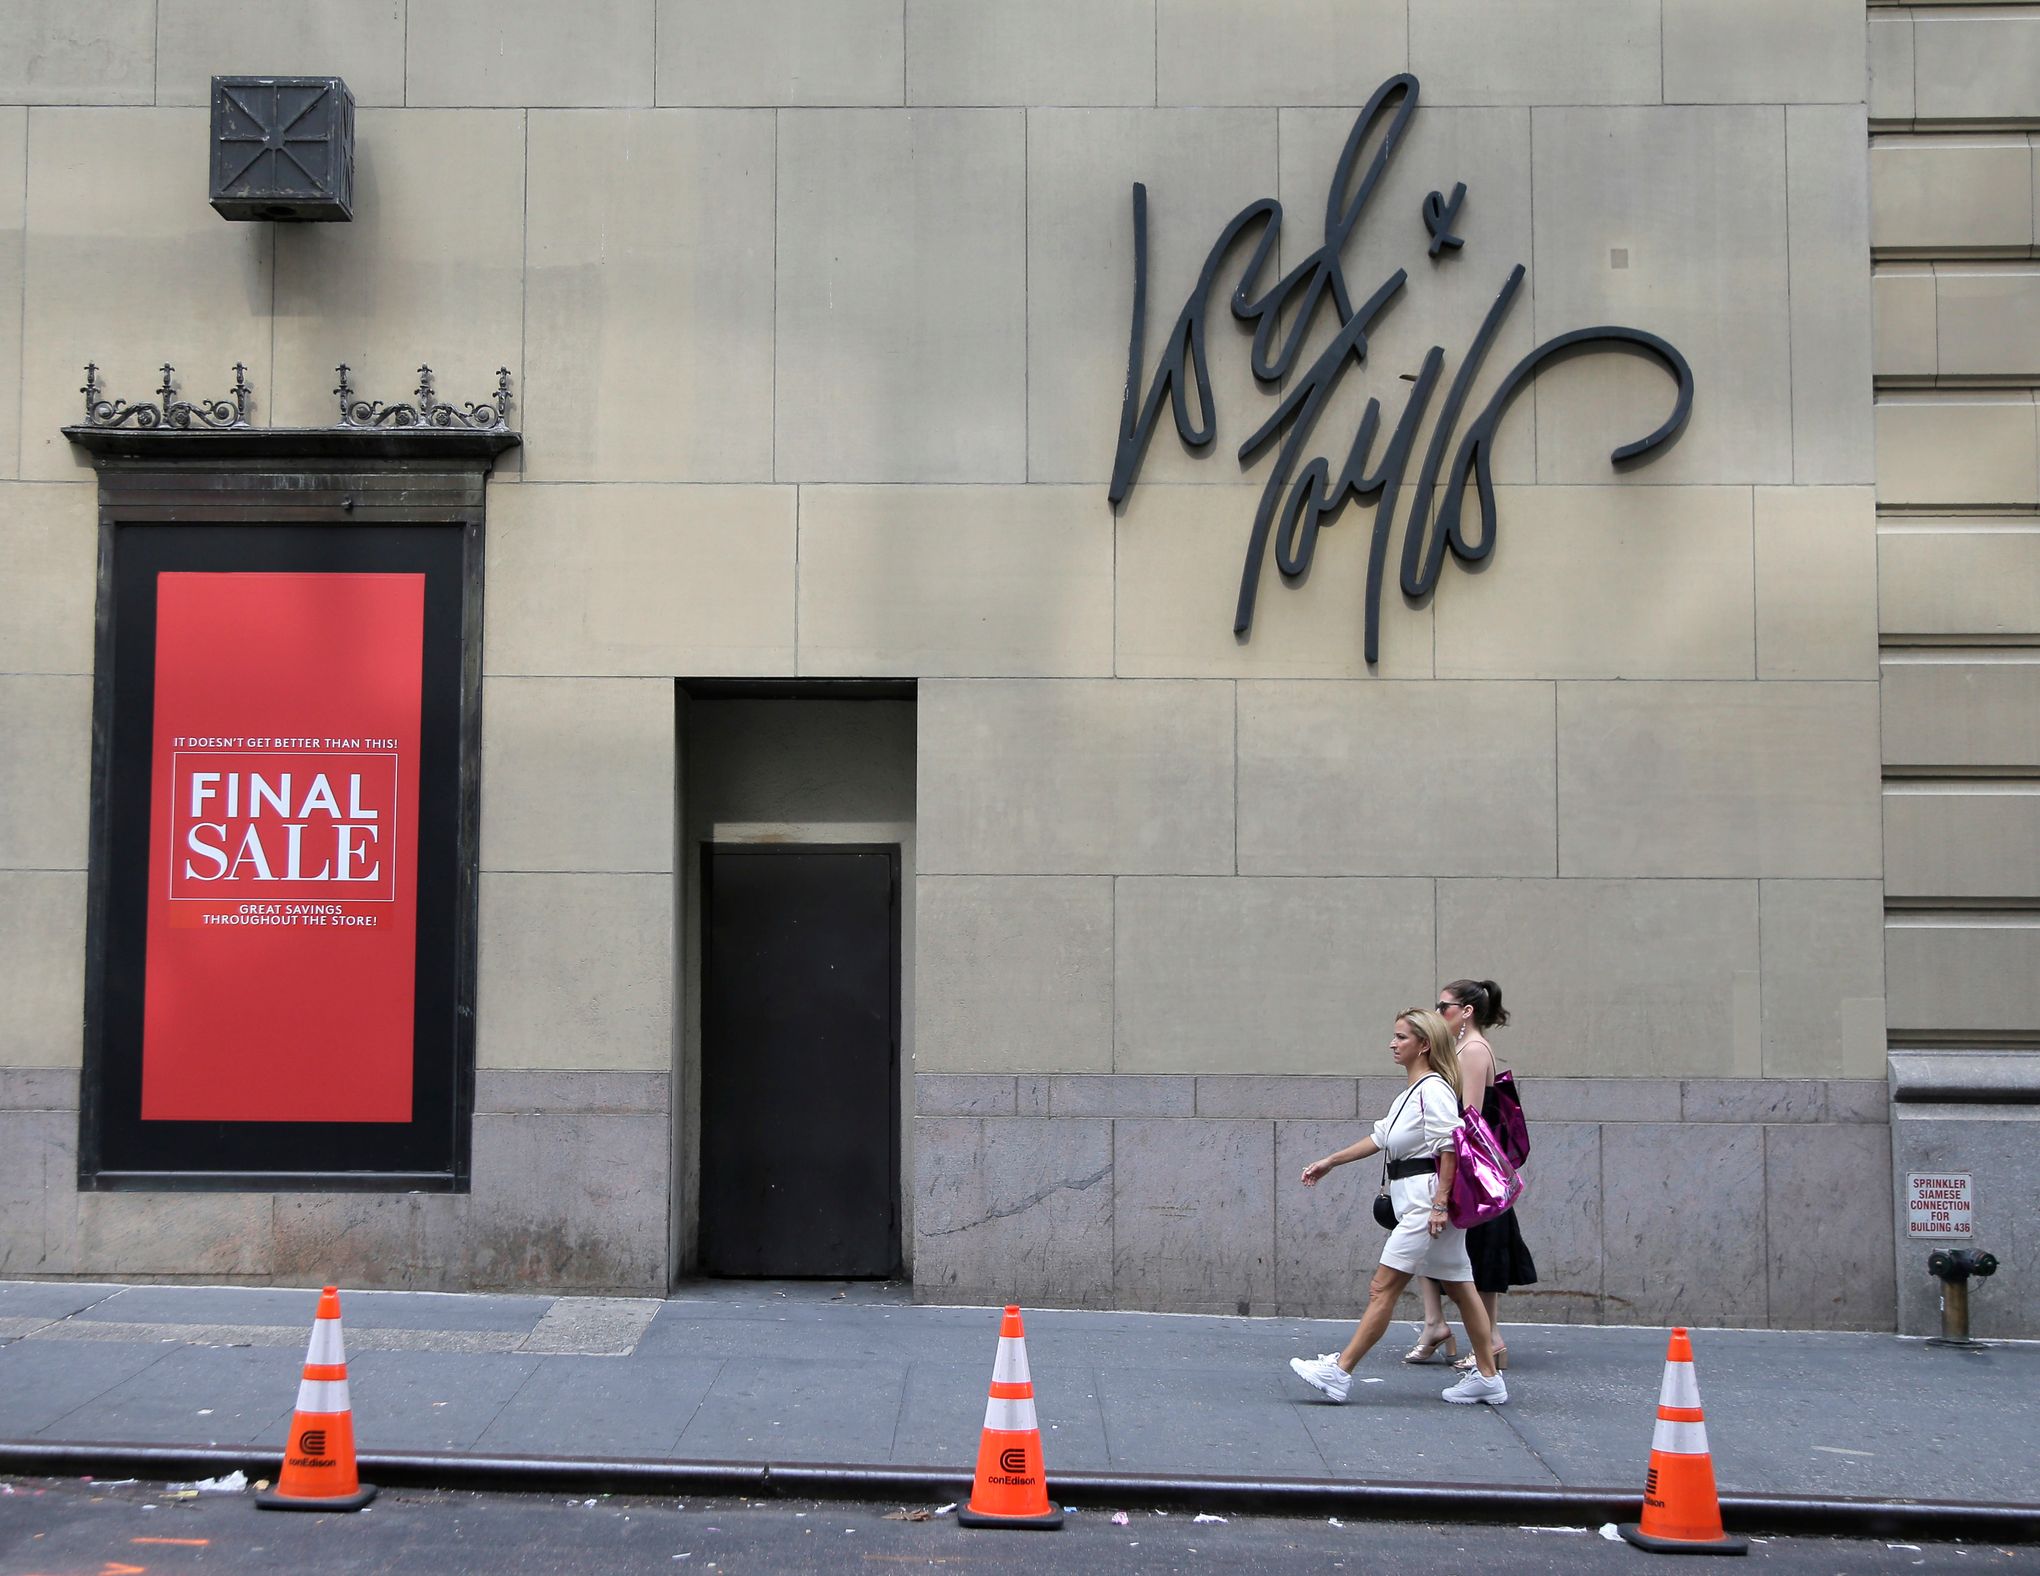 Lord & Taylor Acquired by Le Tote, Clothing Rental Company